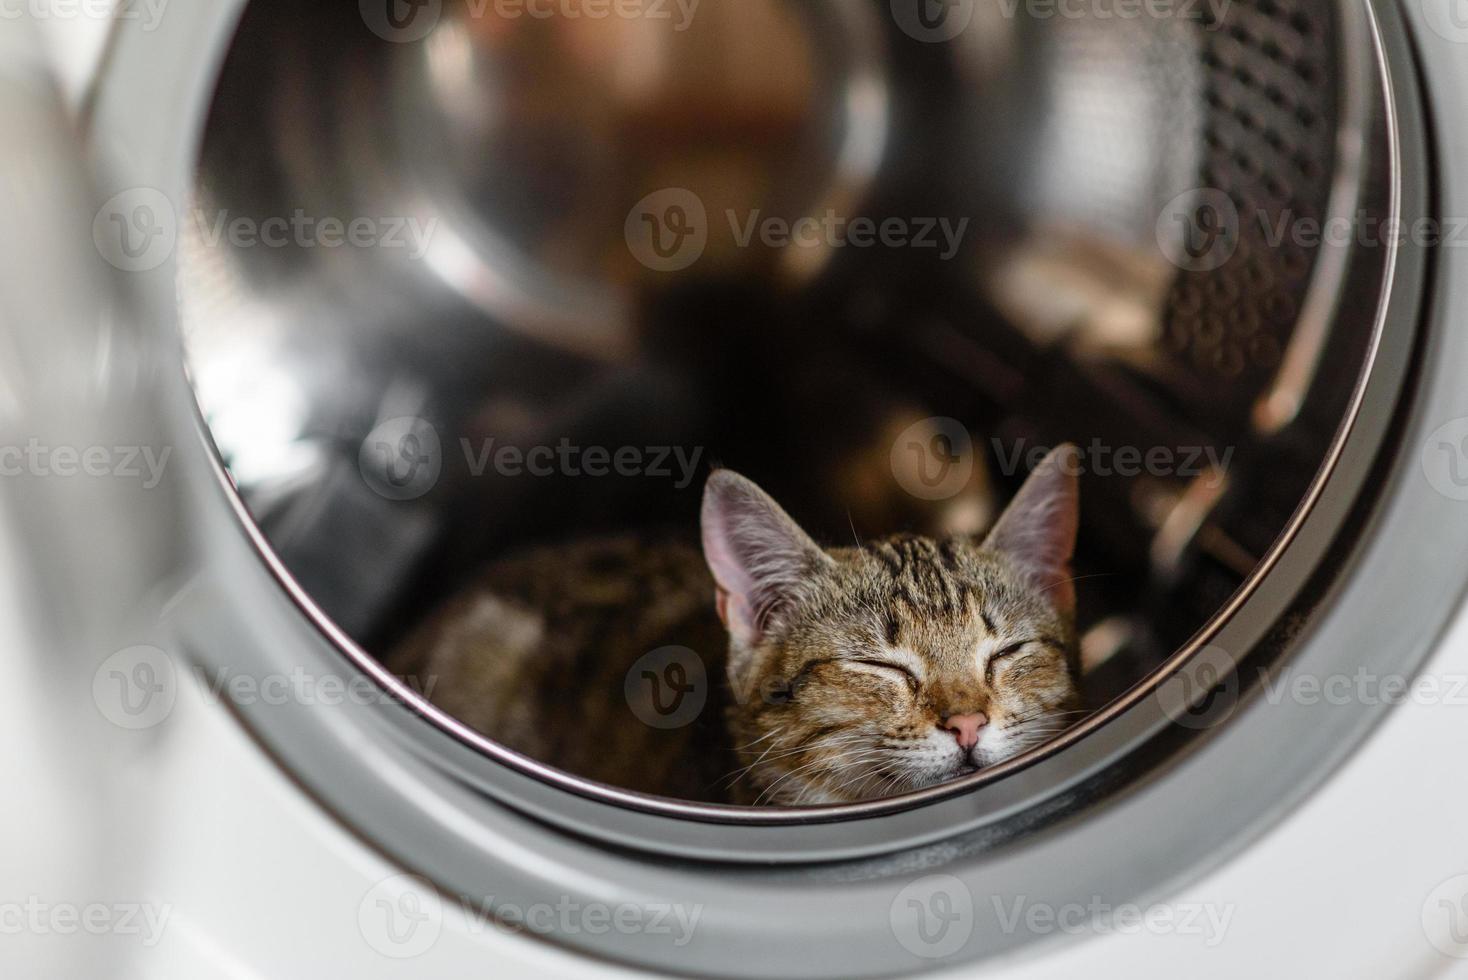 The cat is sitting in a drum in the washing machine photo